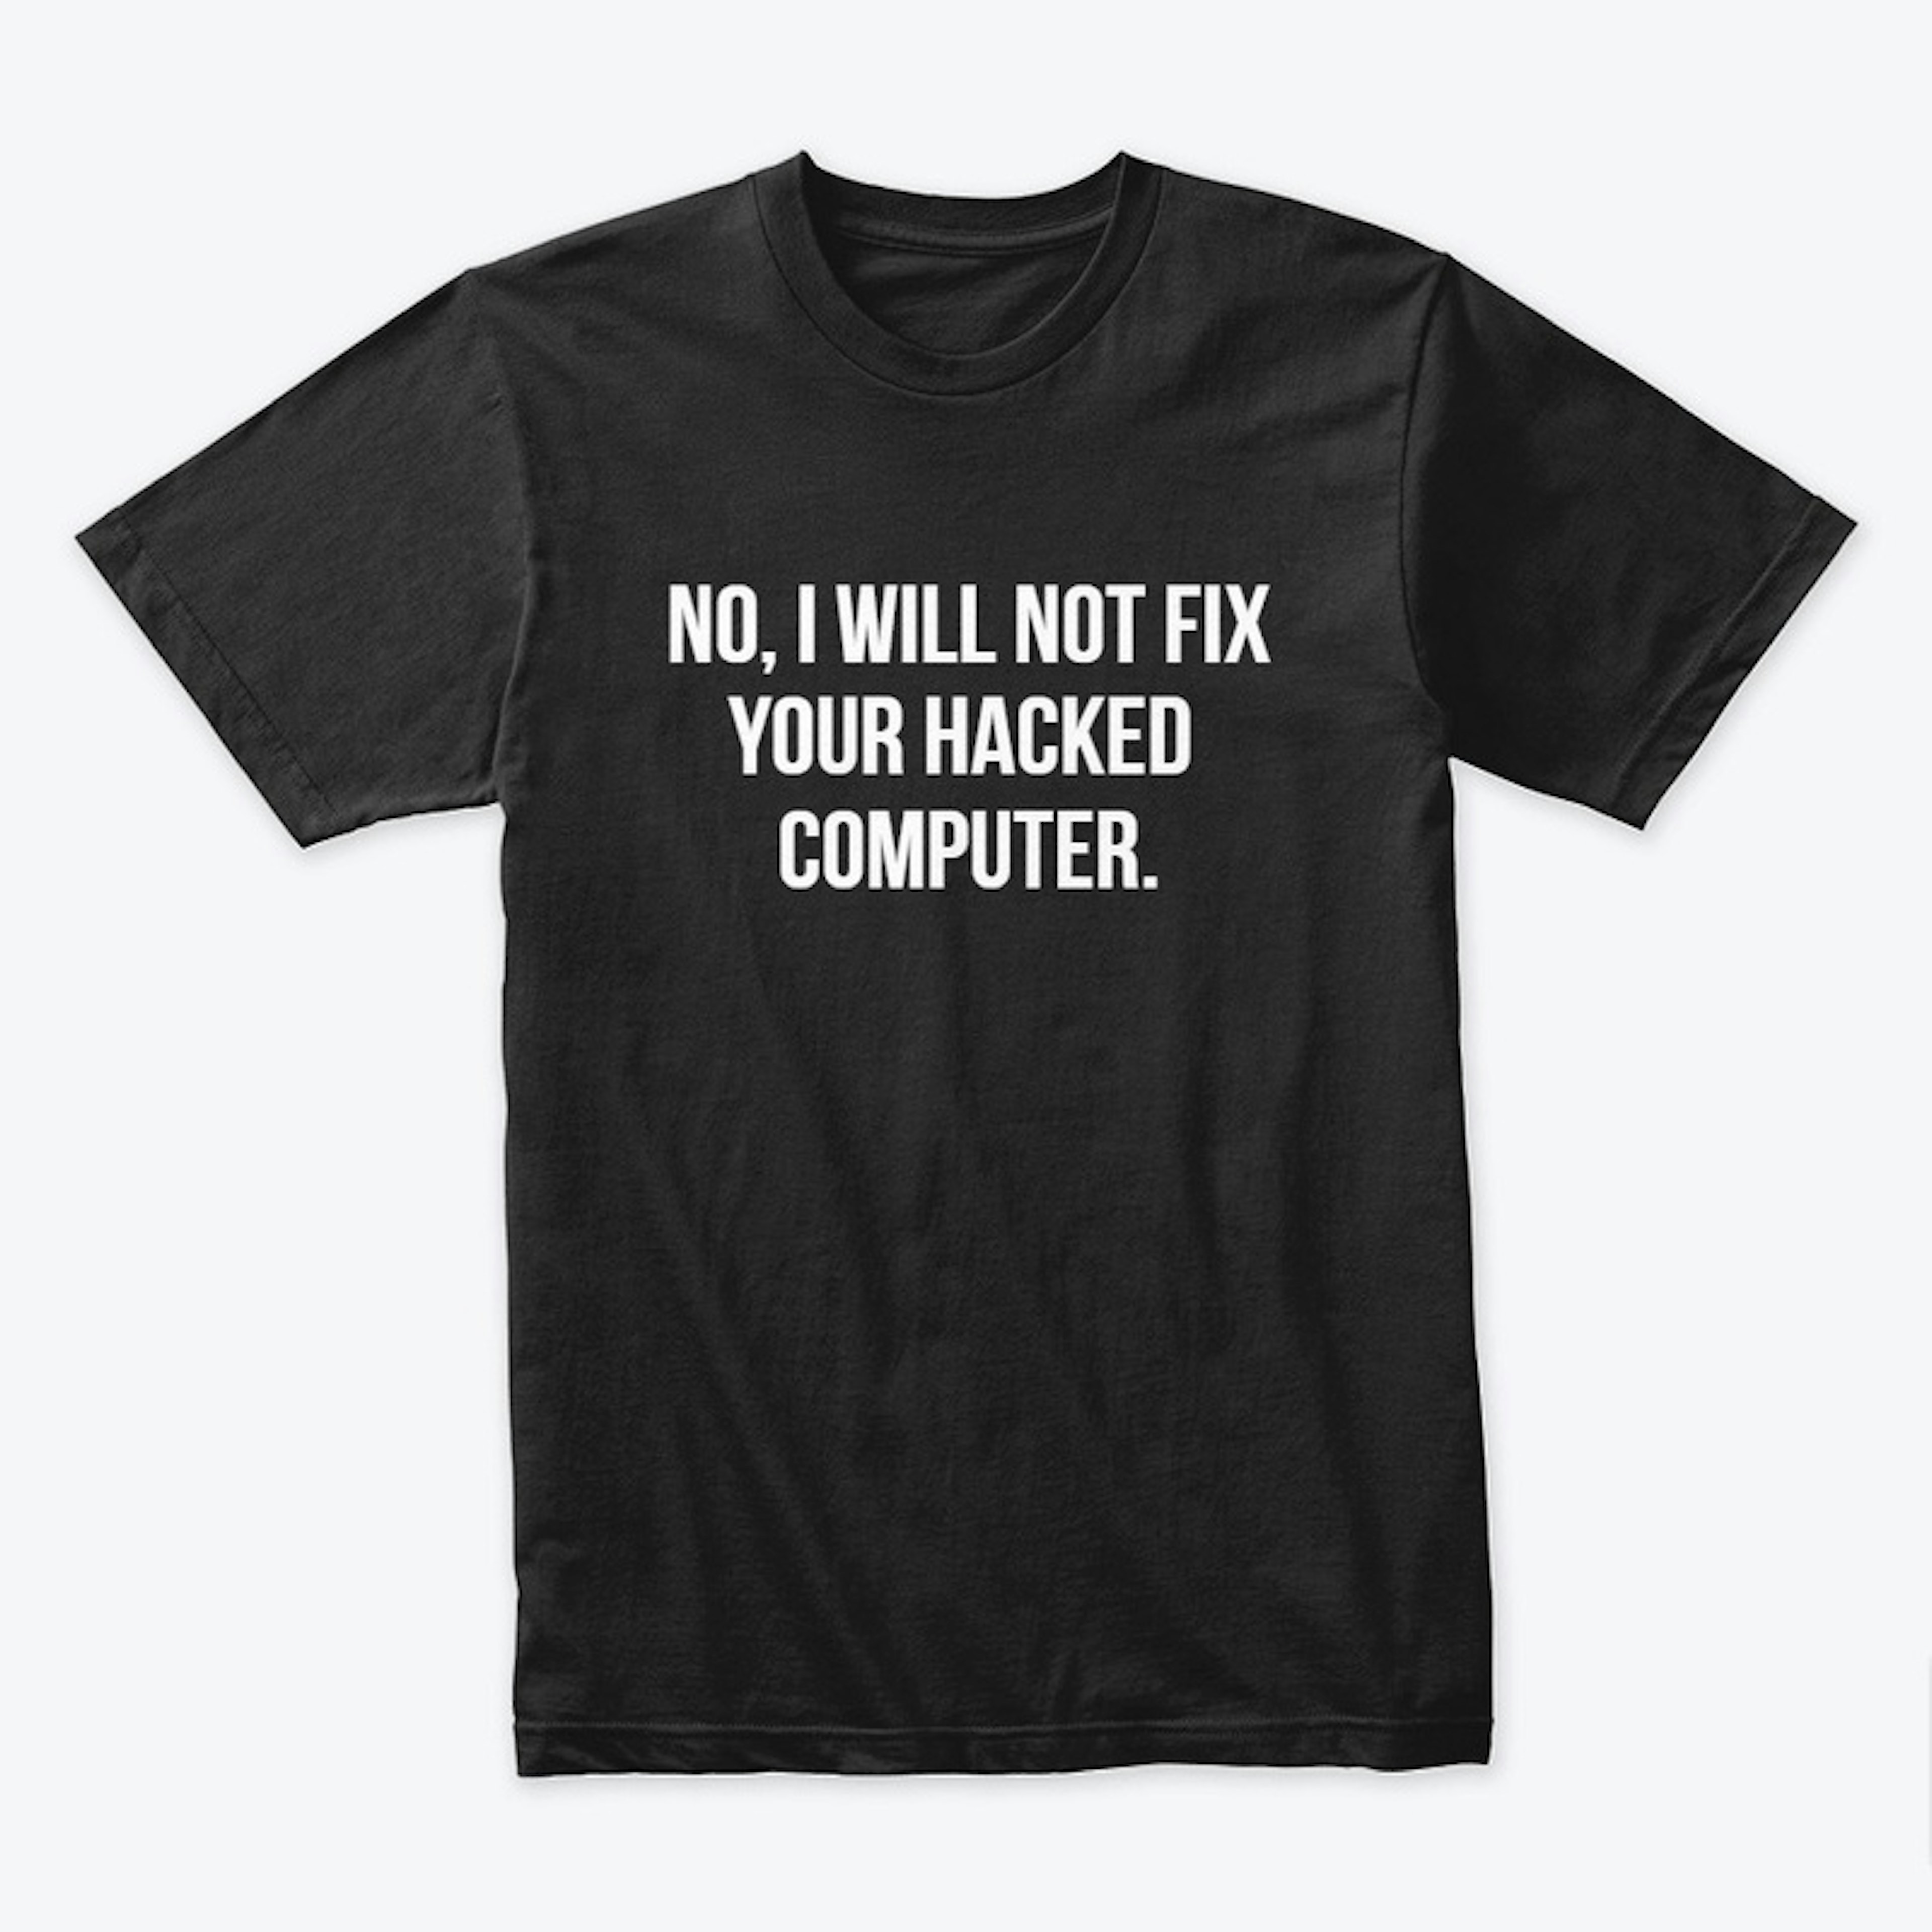 No, I will not fix your hacked computer